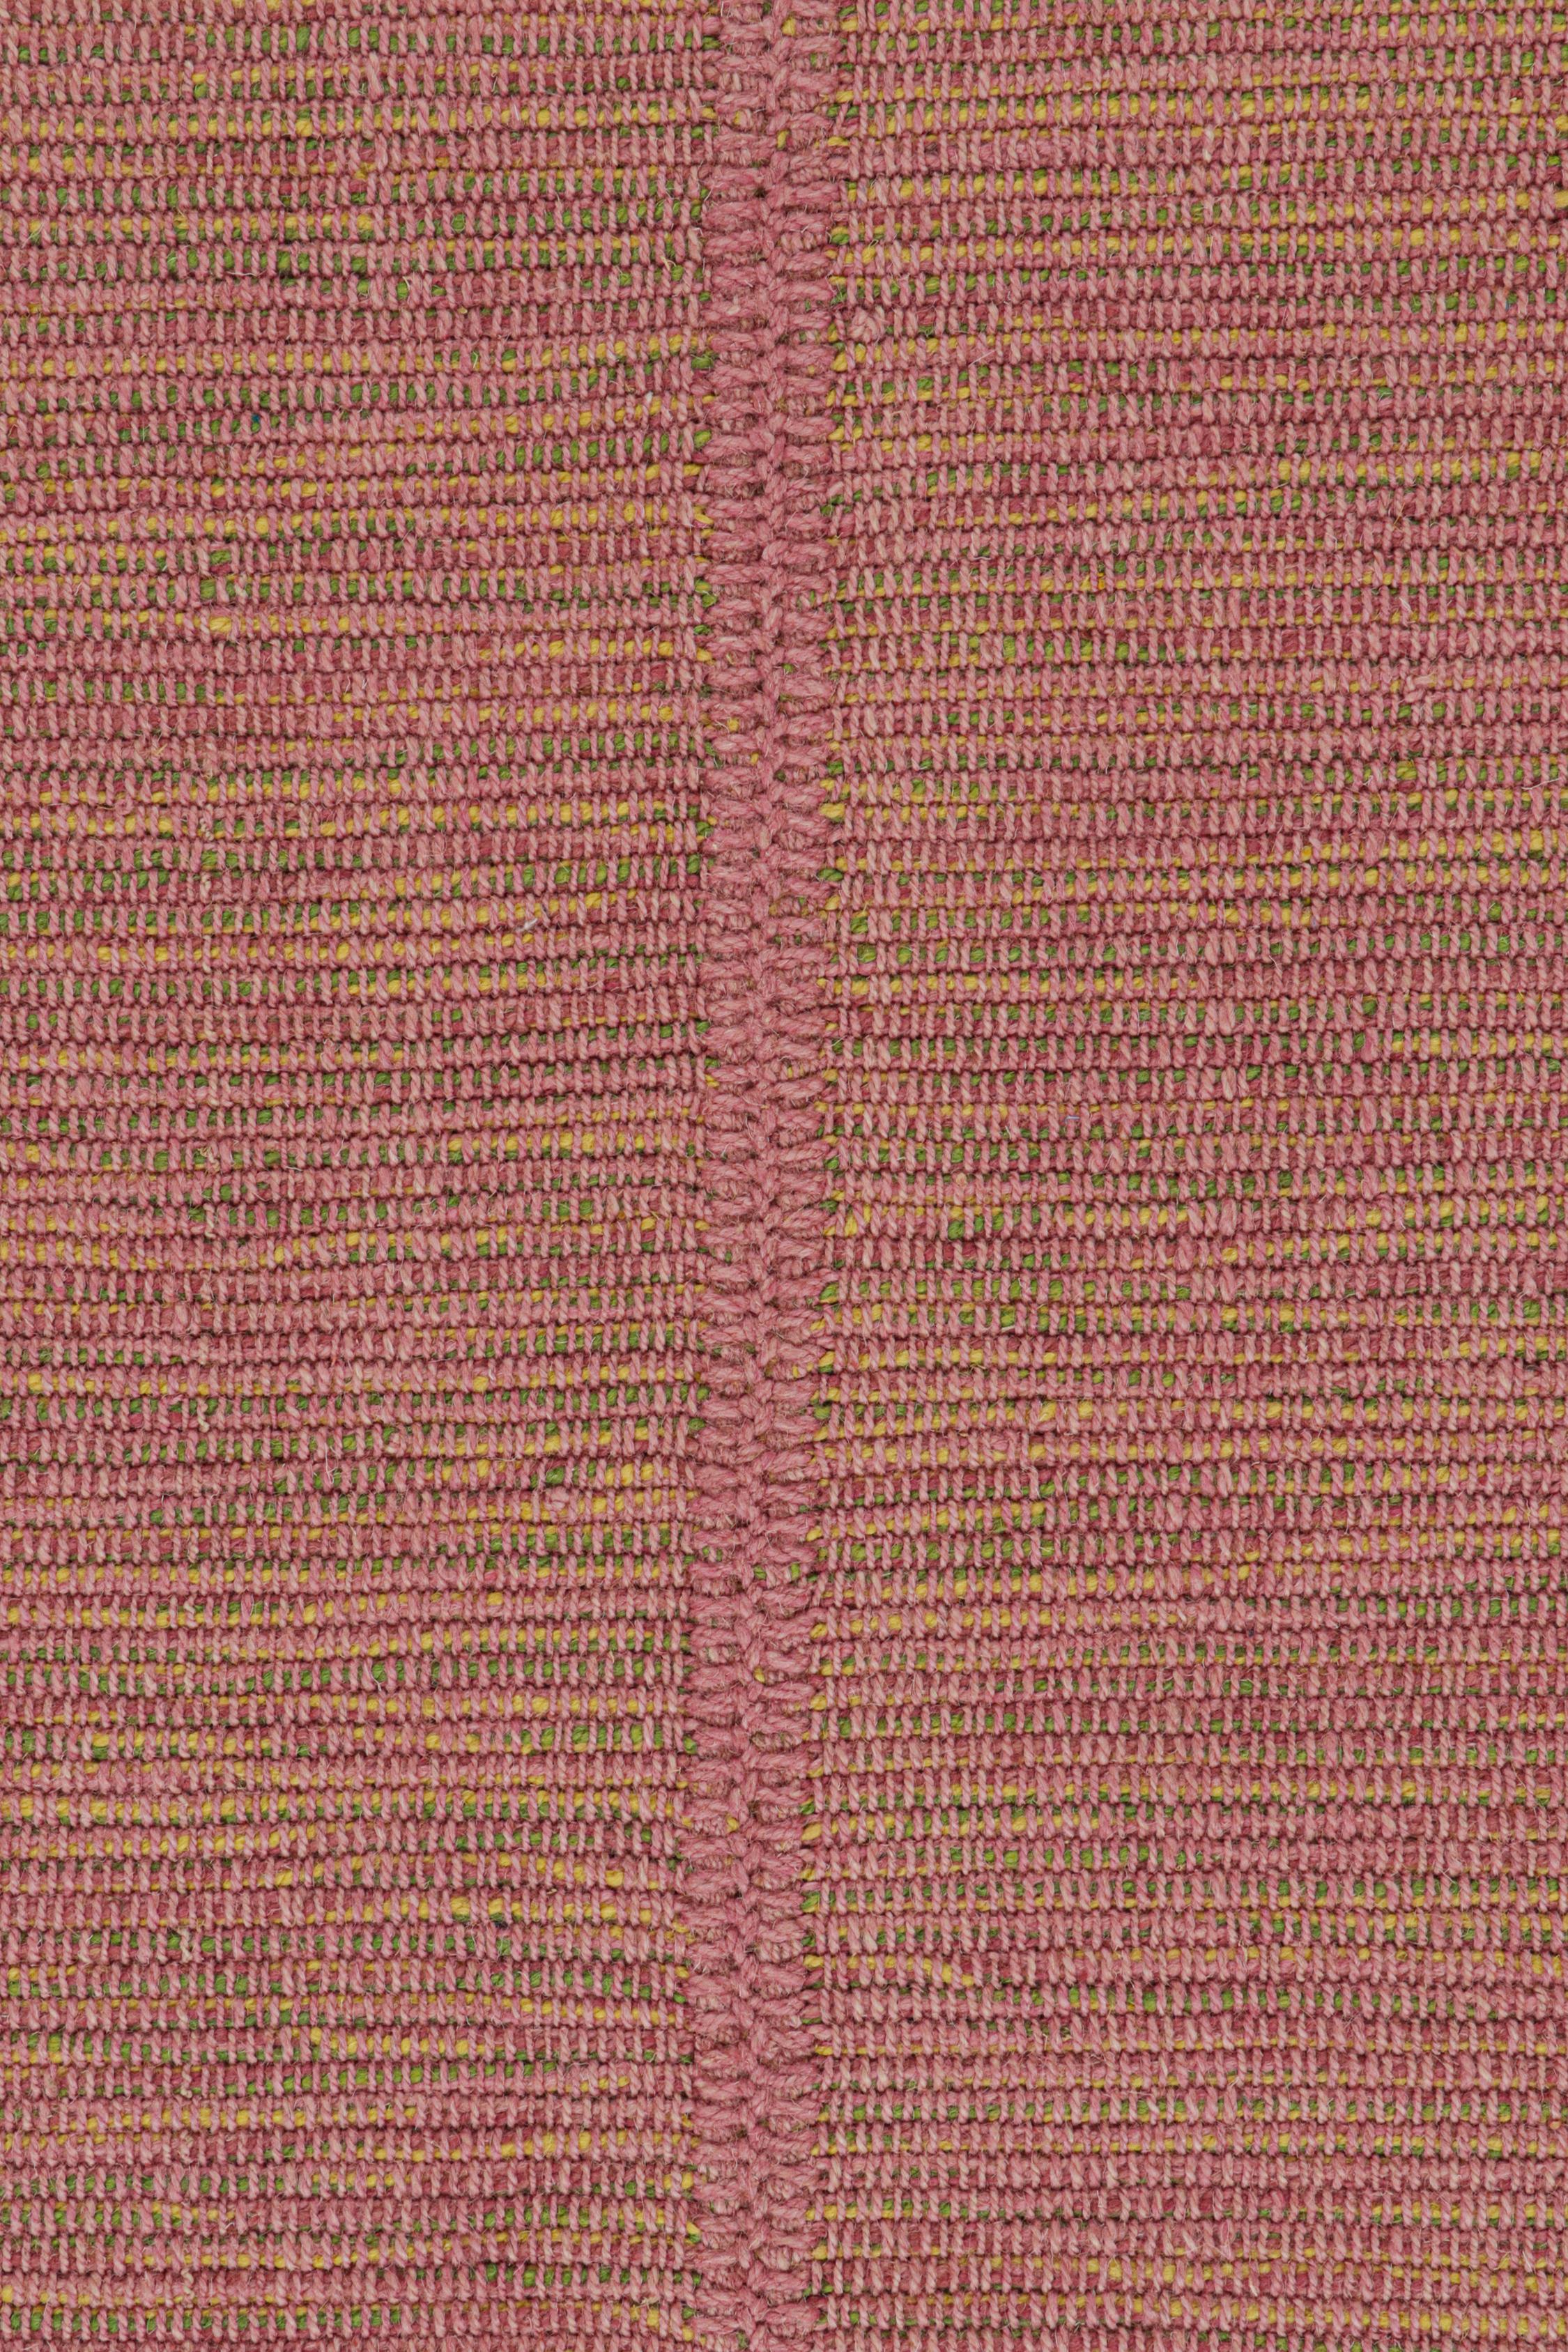 Rug & Kilim's Contemporary Kilim Rug in Pink with Yellow and Green Accents (tapis Kilim contemporain en rose avec des accents jaunes et verts) Neuf - En vente à Long Island City, NY